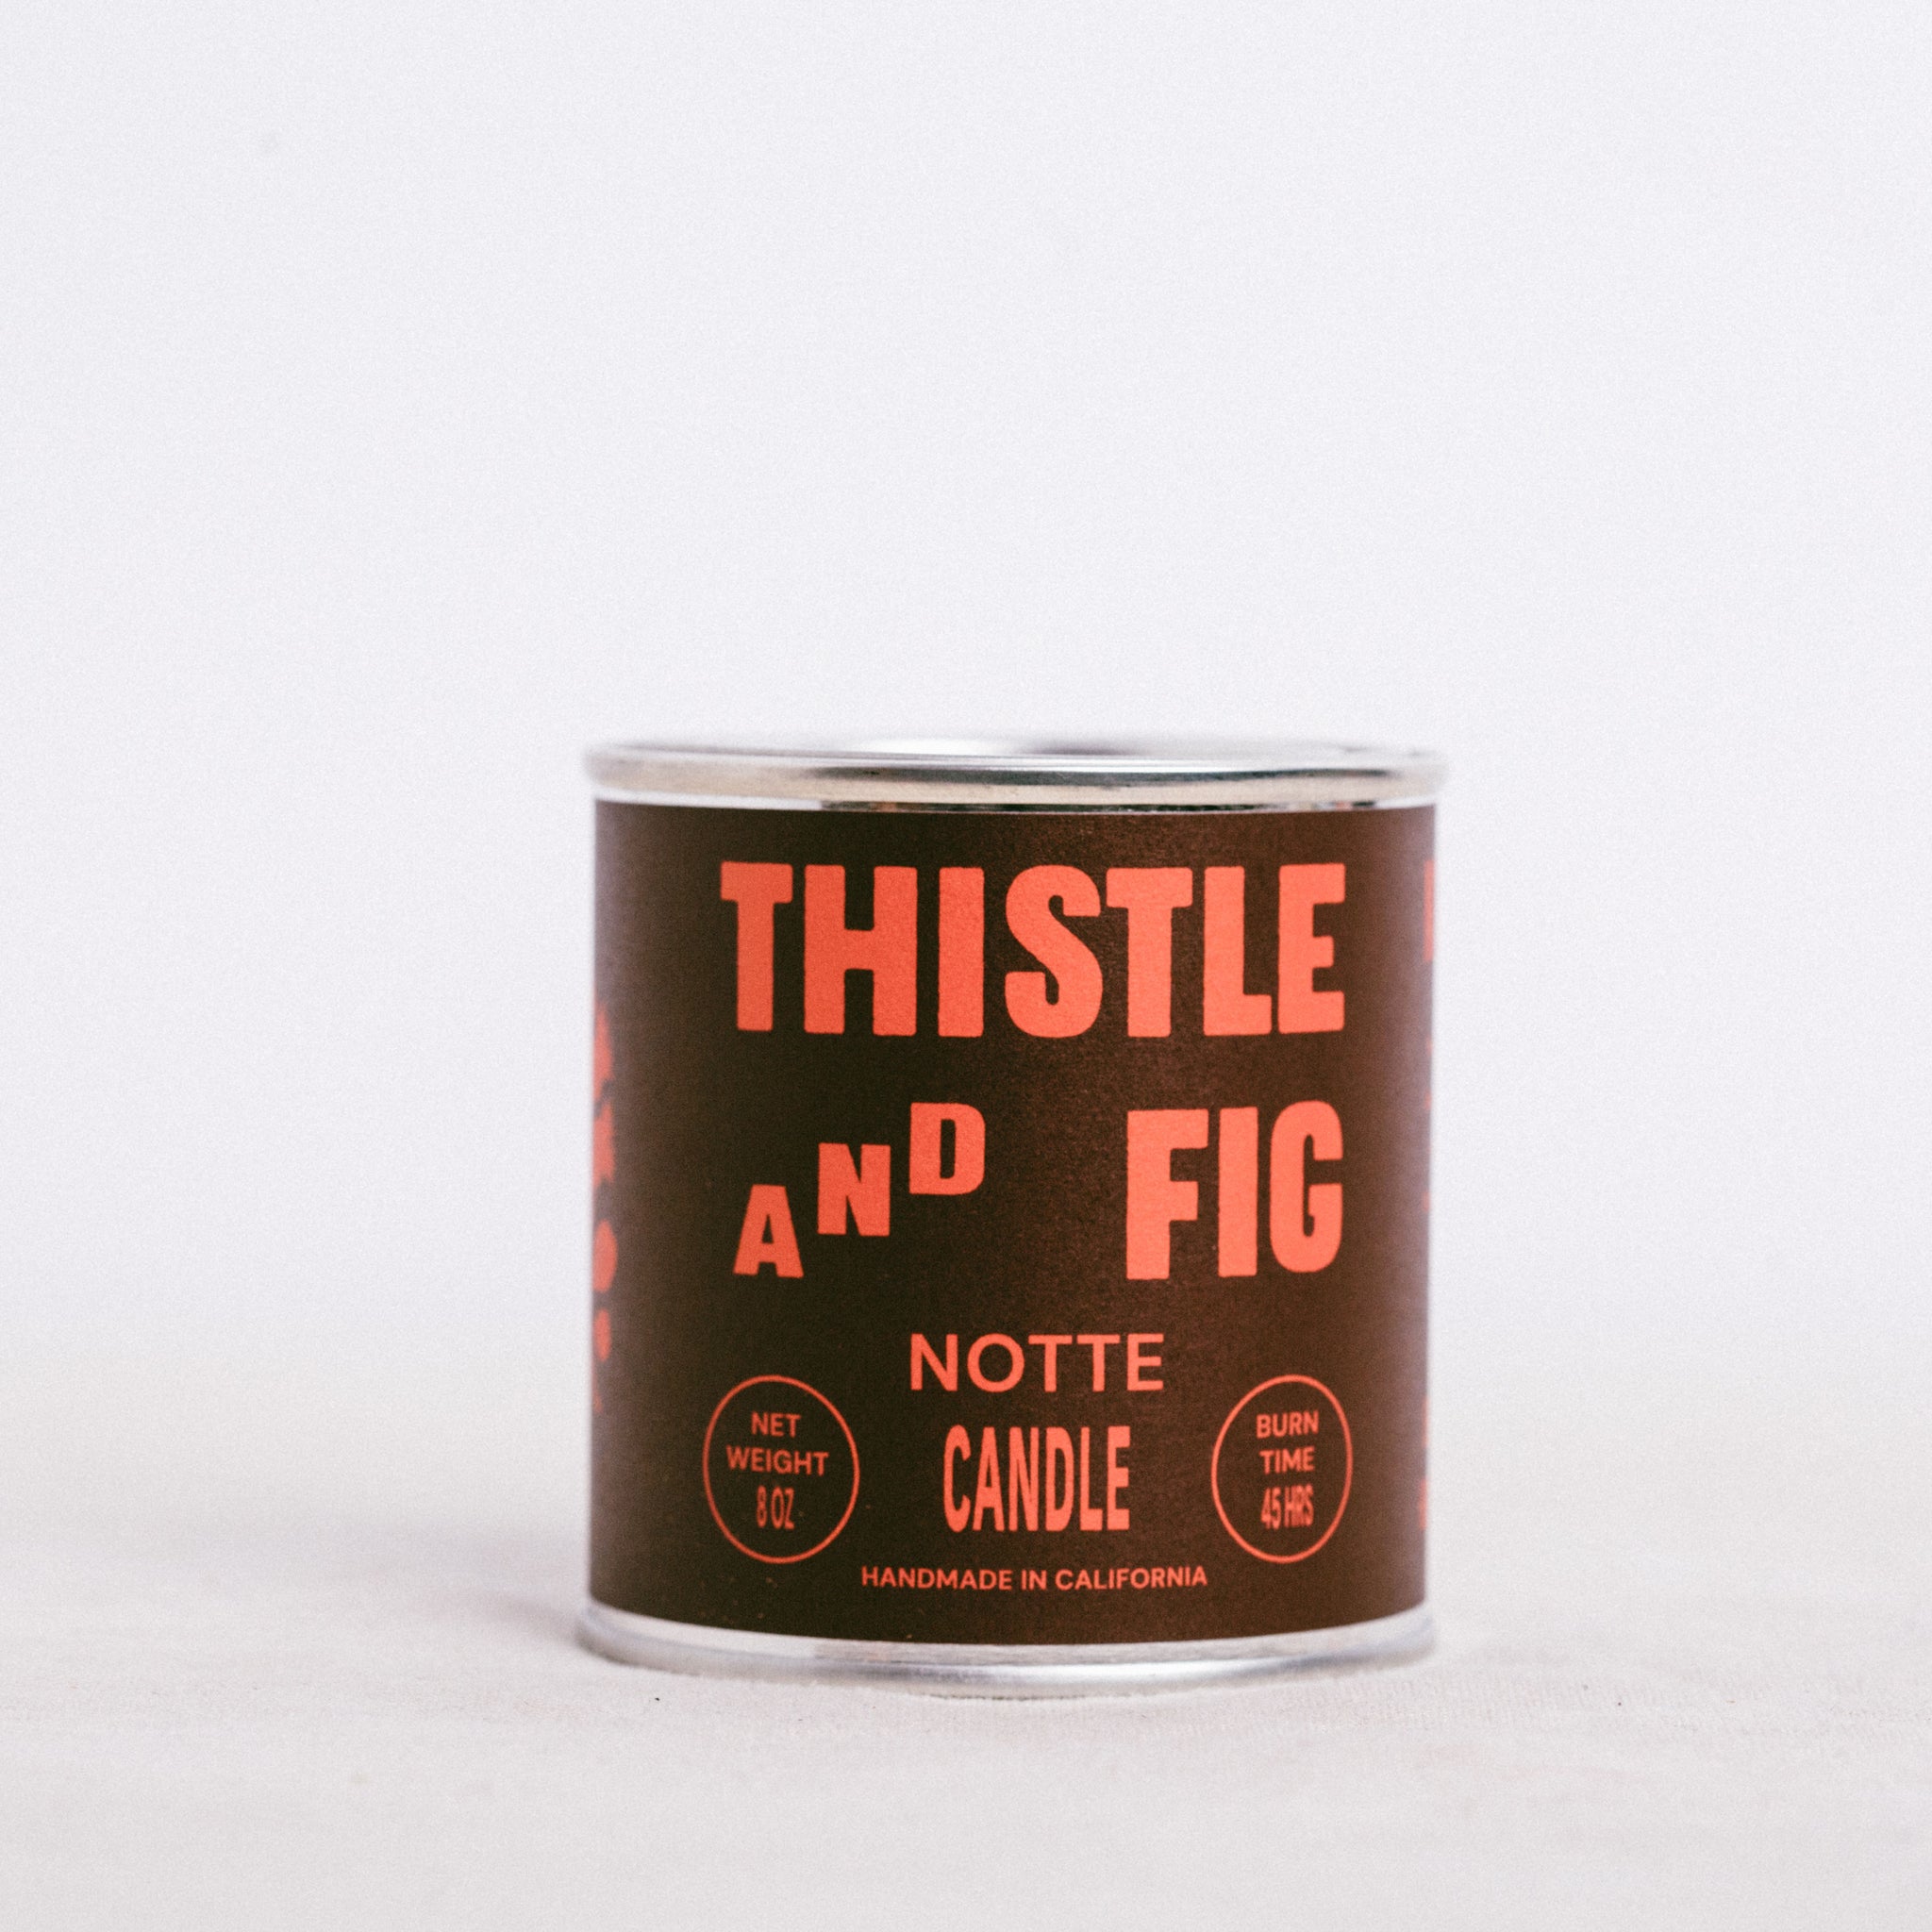 NOTTE CANDLE || THISTLE & FIG